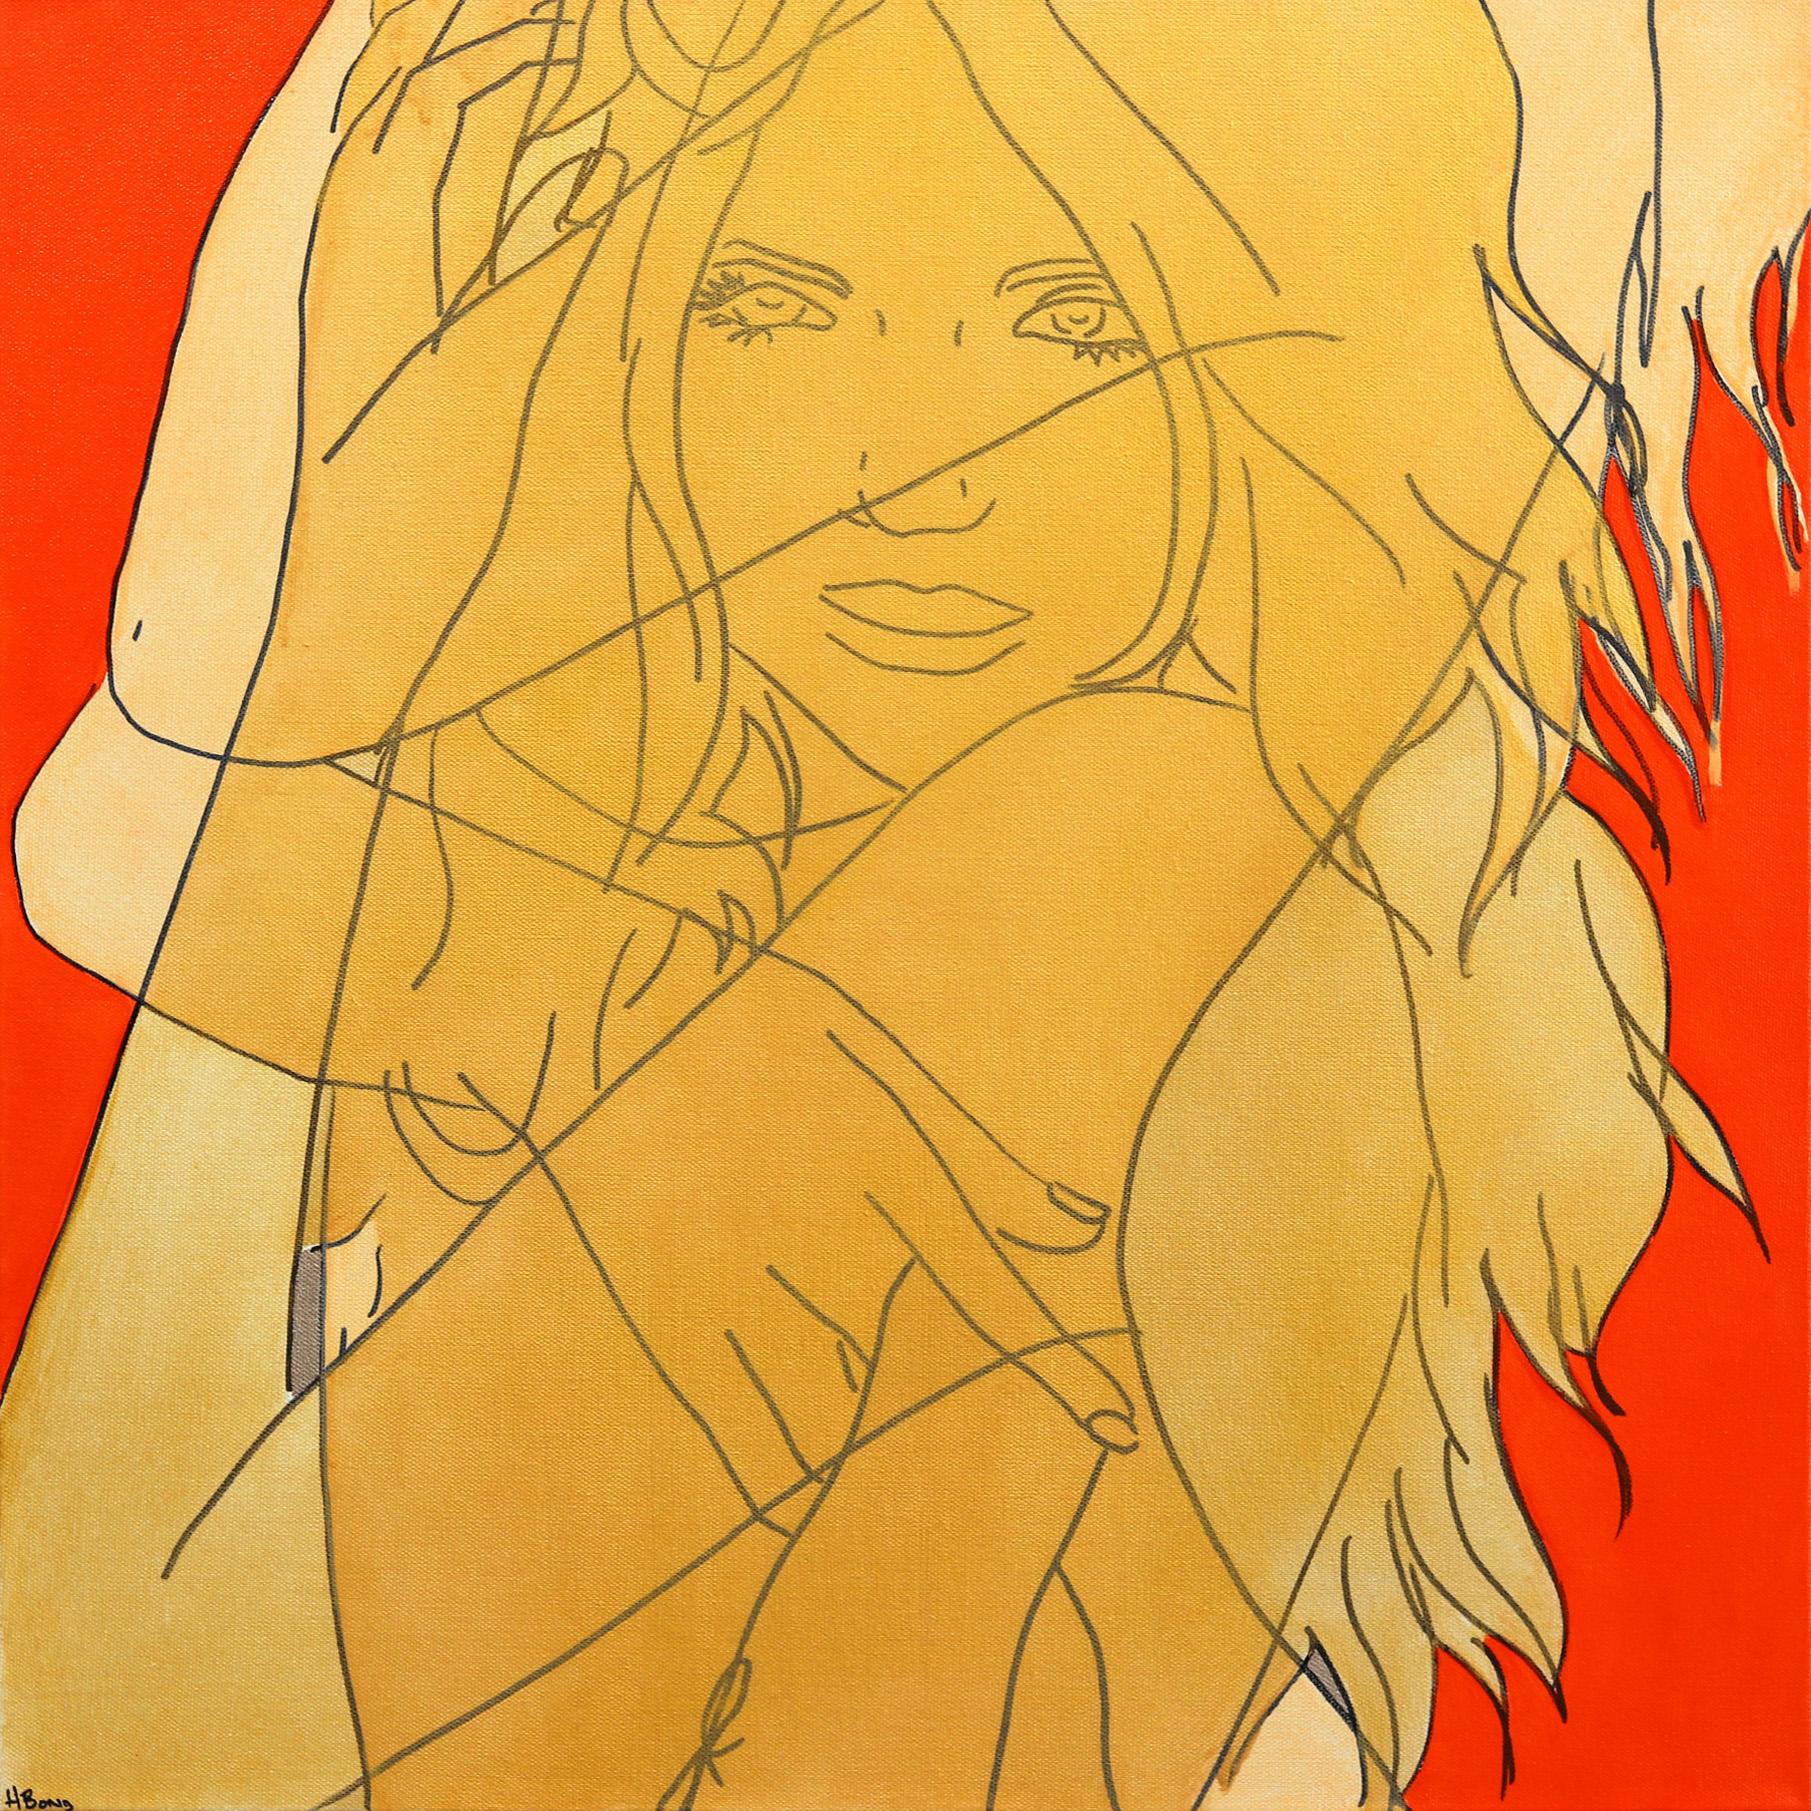 Untitled (Fire III) - Figurative Portrait Red and Yellow Woman Pop Art Painting